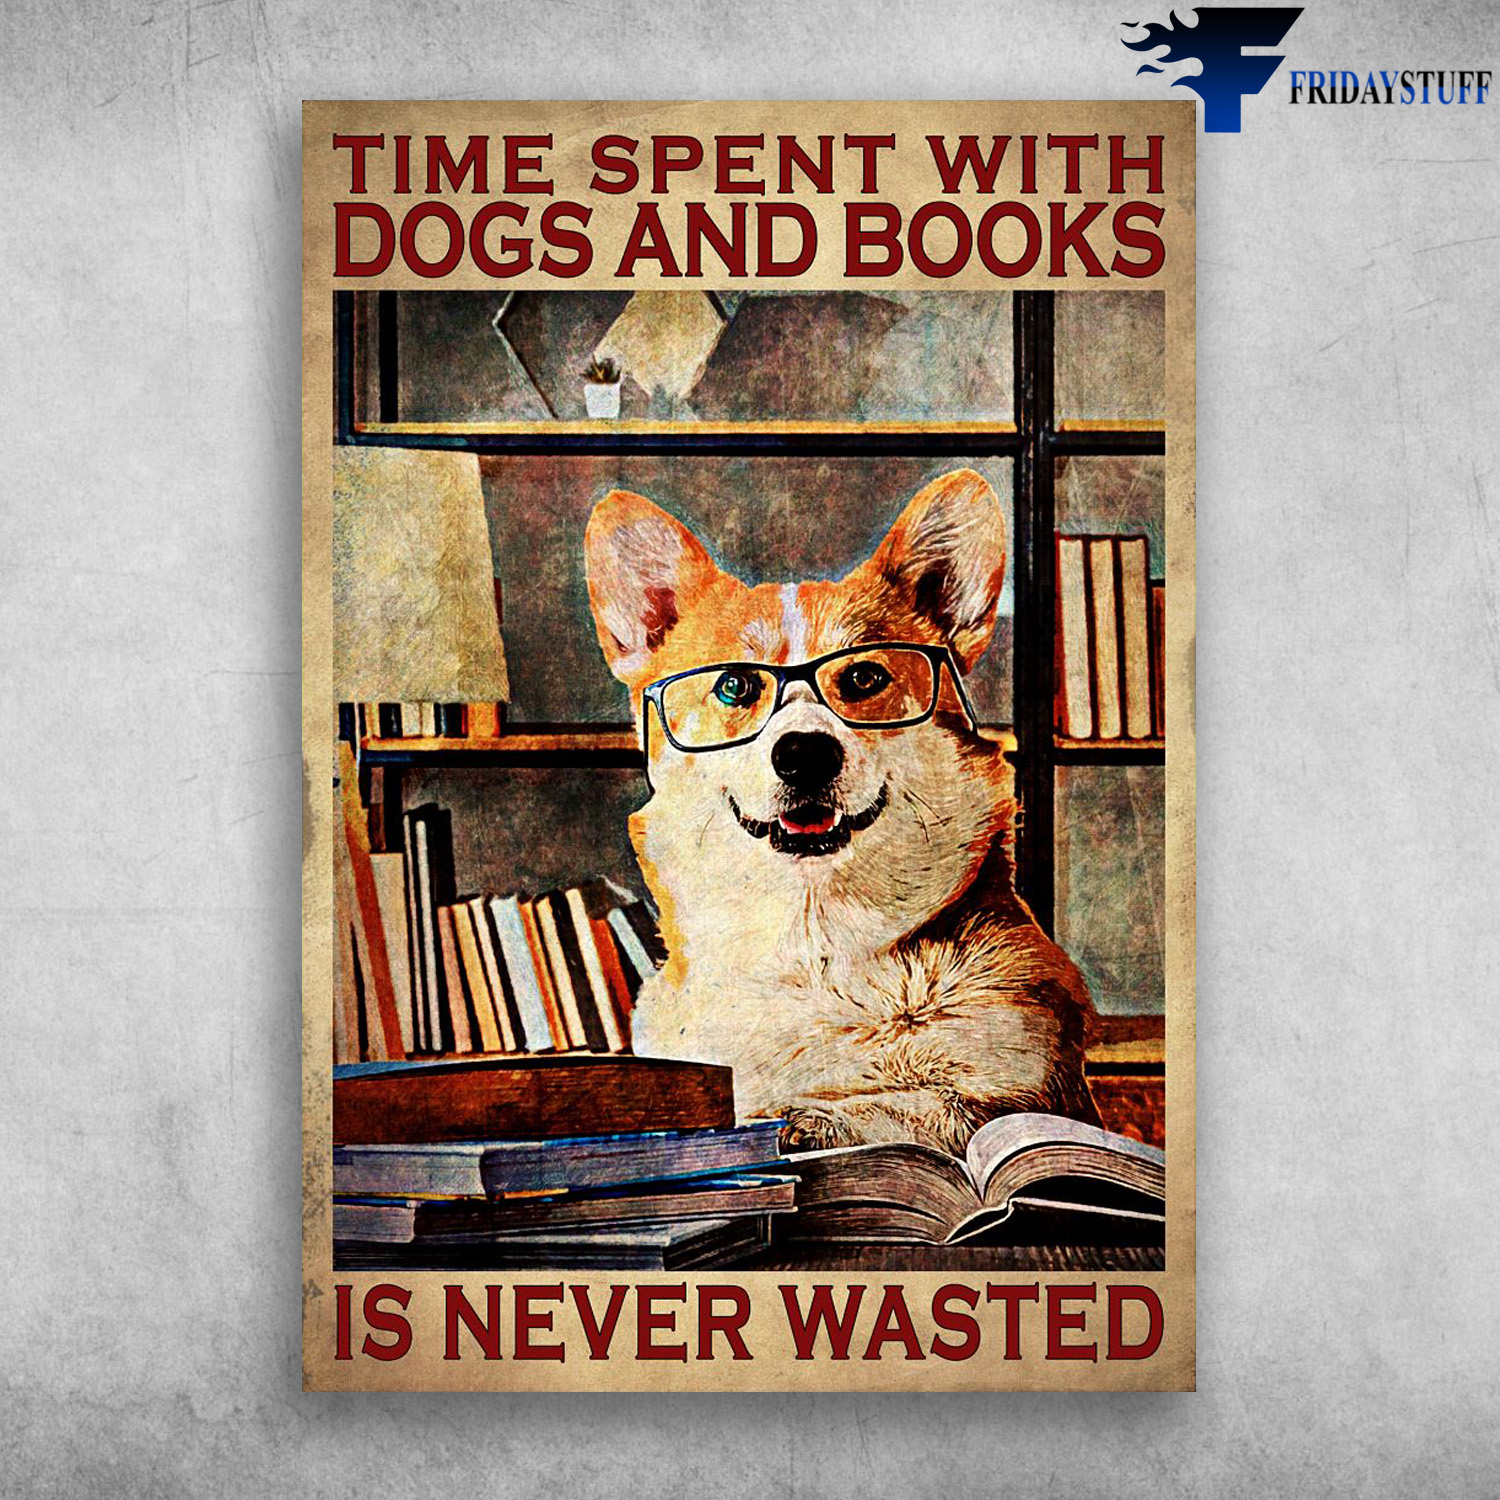 Corgi Reading, Book Lover - Time Spent With Dogs And Books, Is Never Wasted